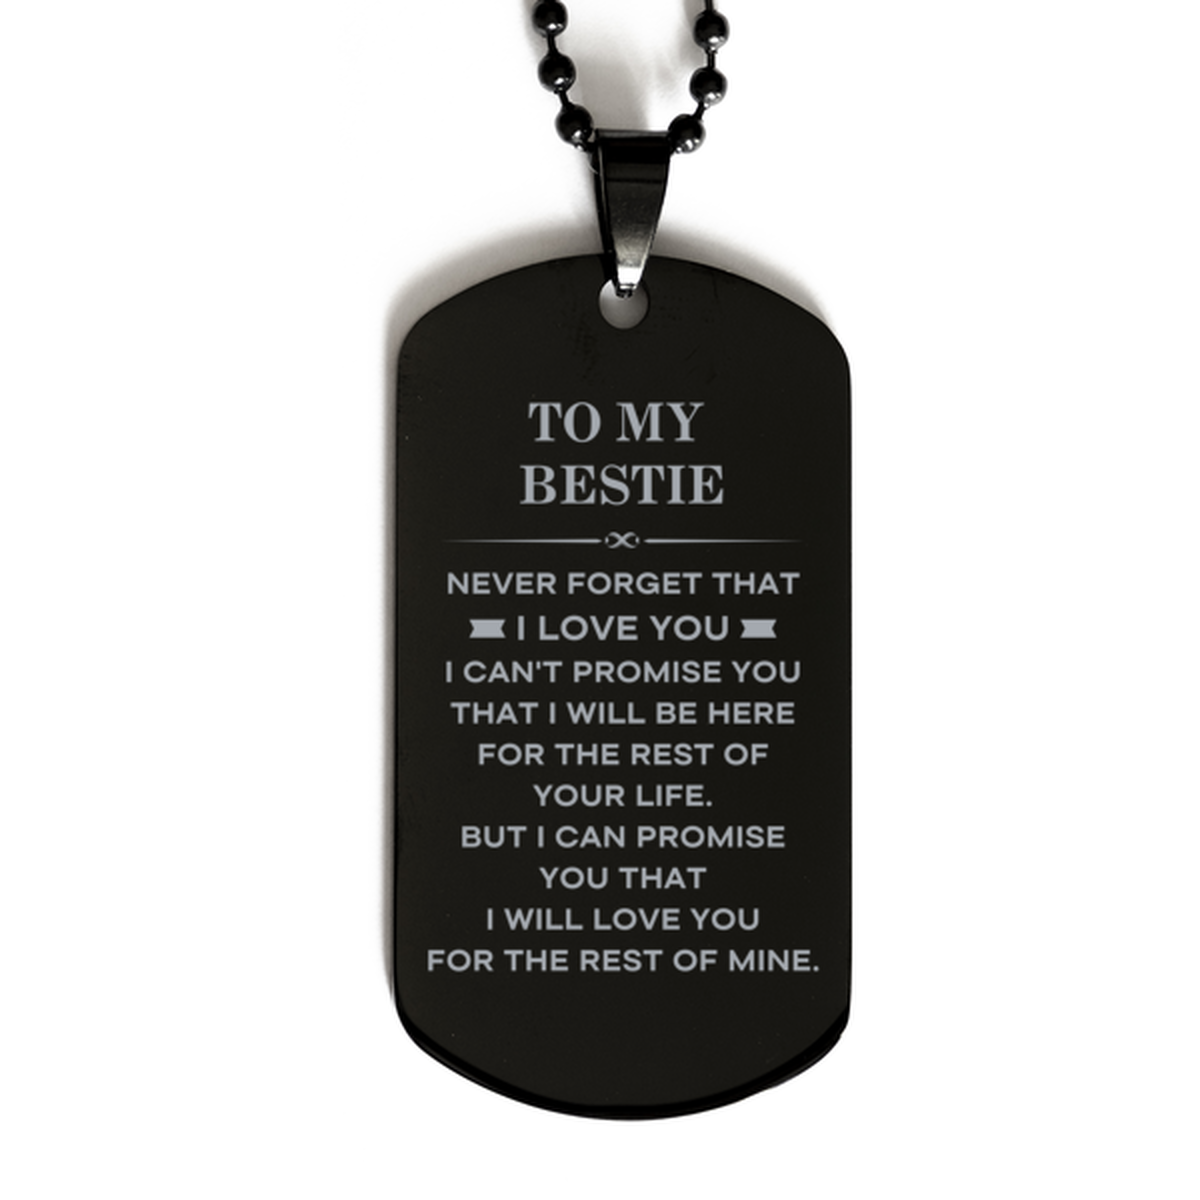 To My Bestie Gifts, I will love you for the rest of mine, Love Bestie Dog Tag Necklace, Birthday Christmas Unique Black Dog Tag For Bestie